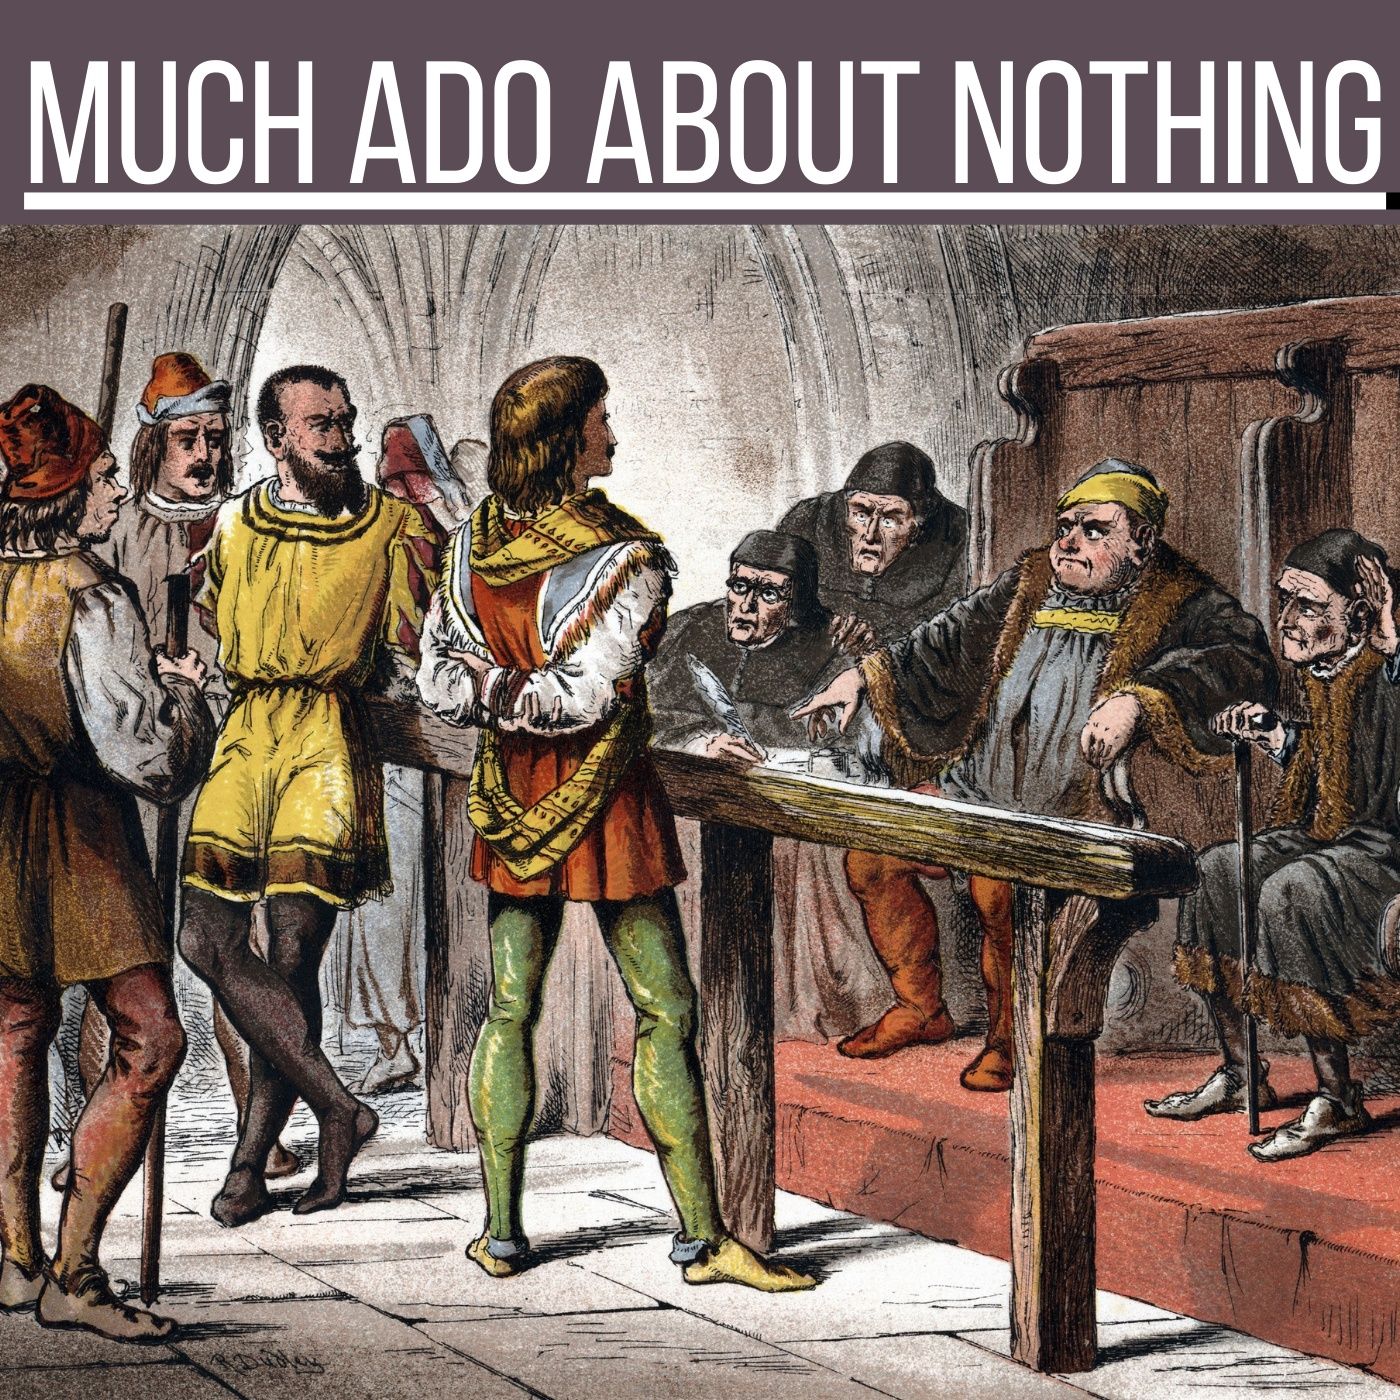 Much Ado About Nothing – William Shakespeare